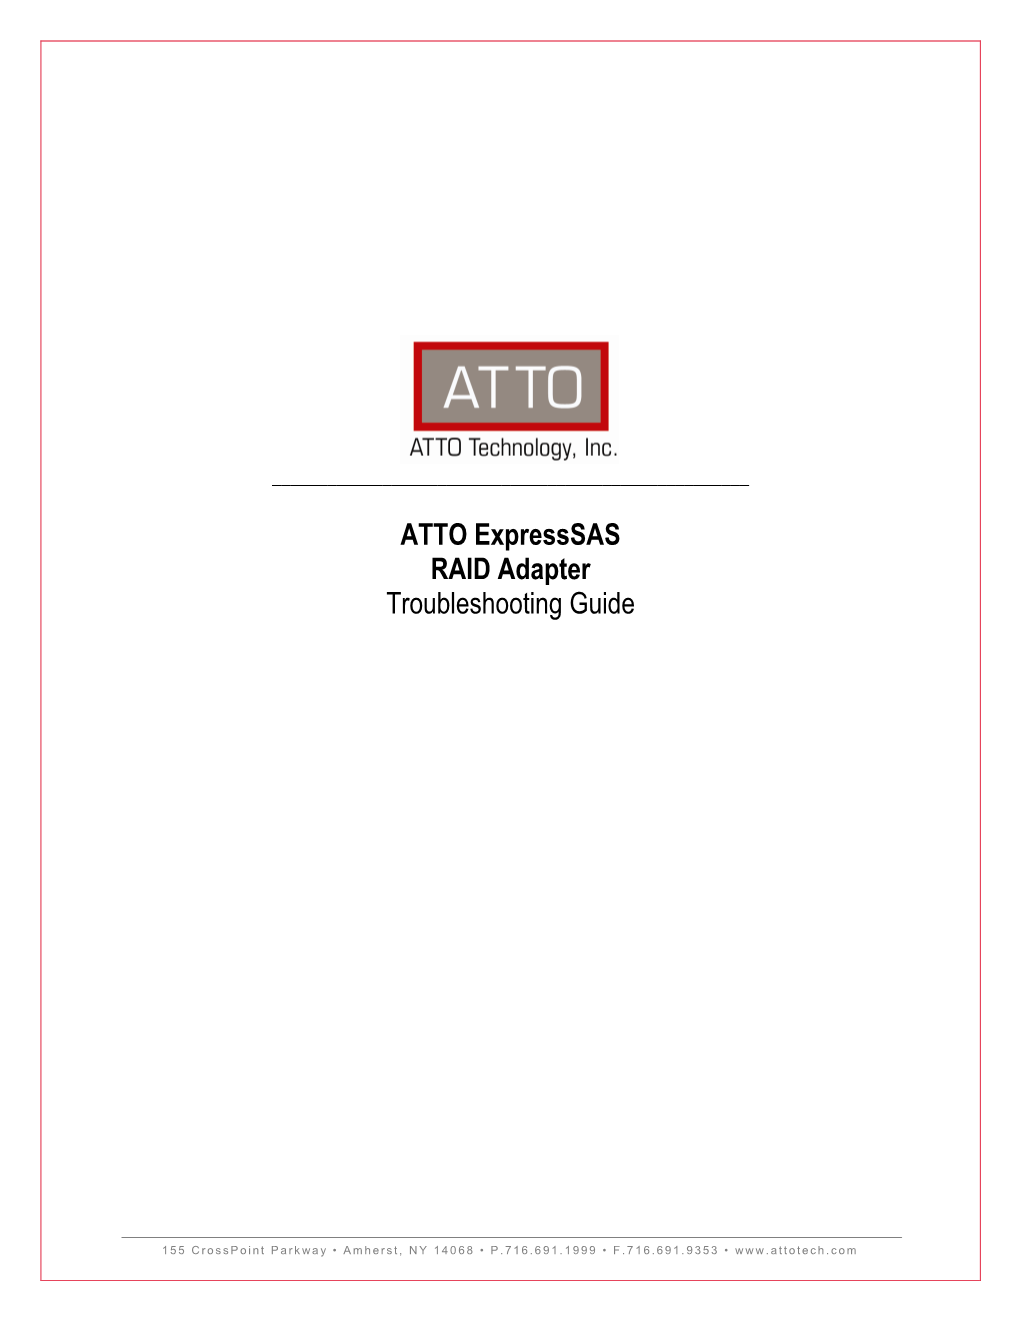 ATTO Expresssas RAID Adapter Troubleshooting Guide